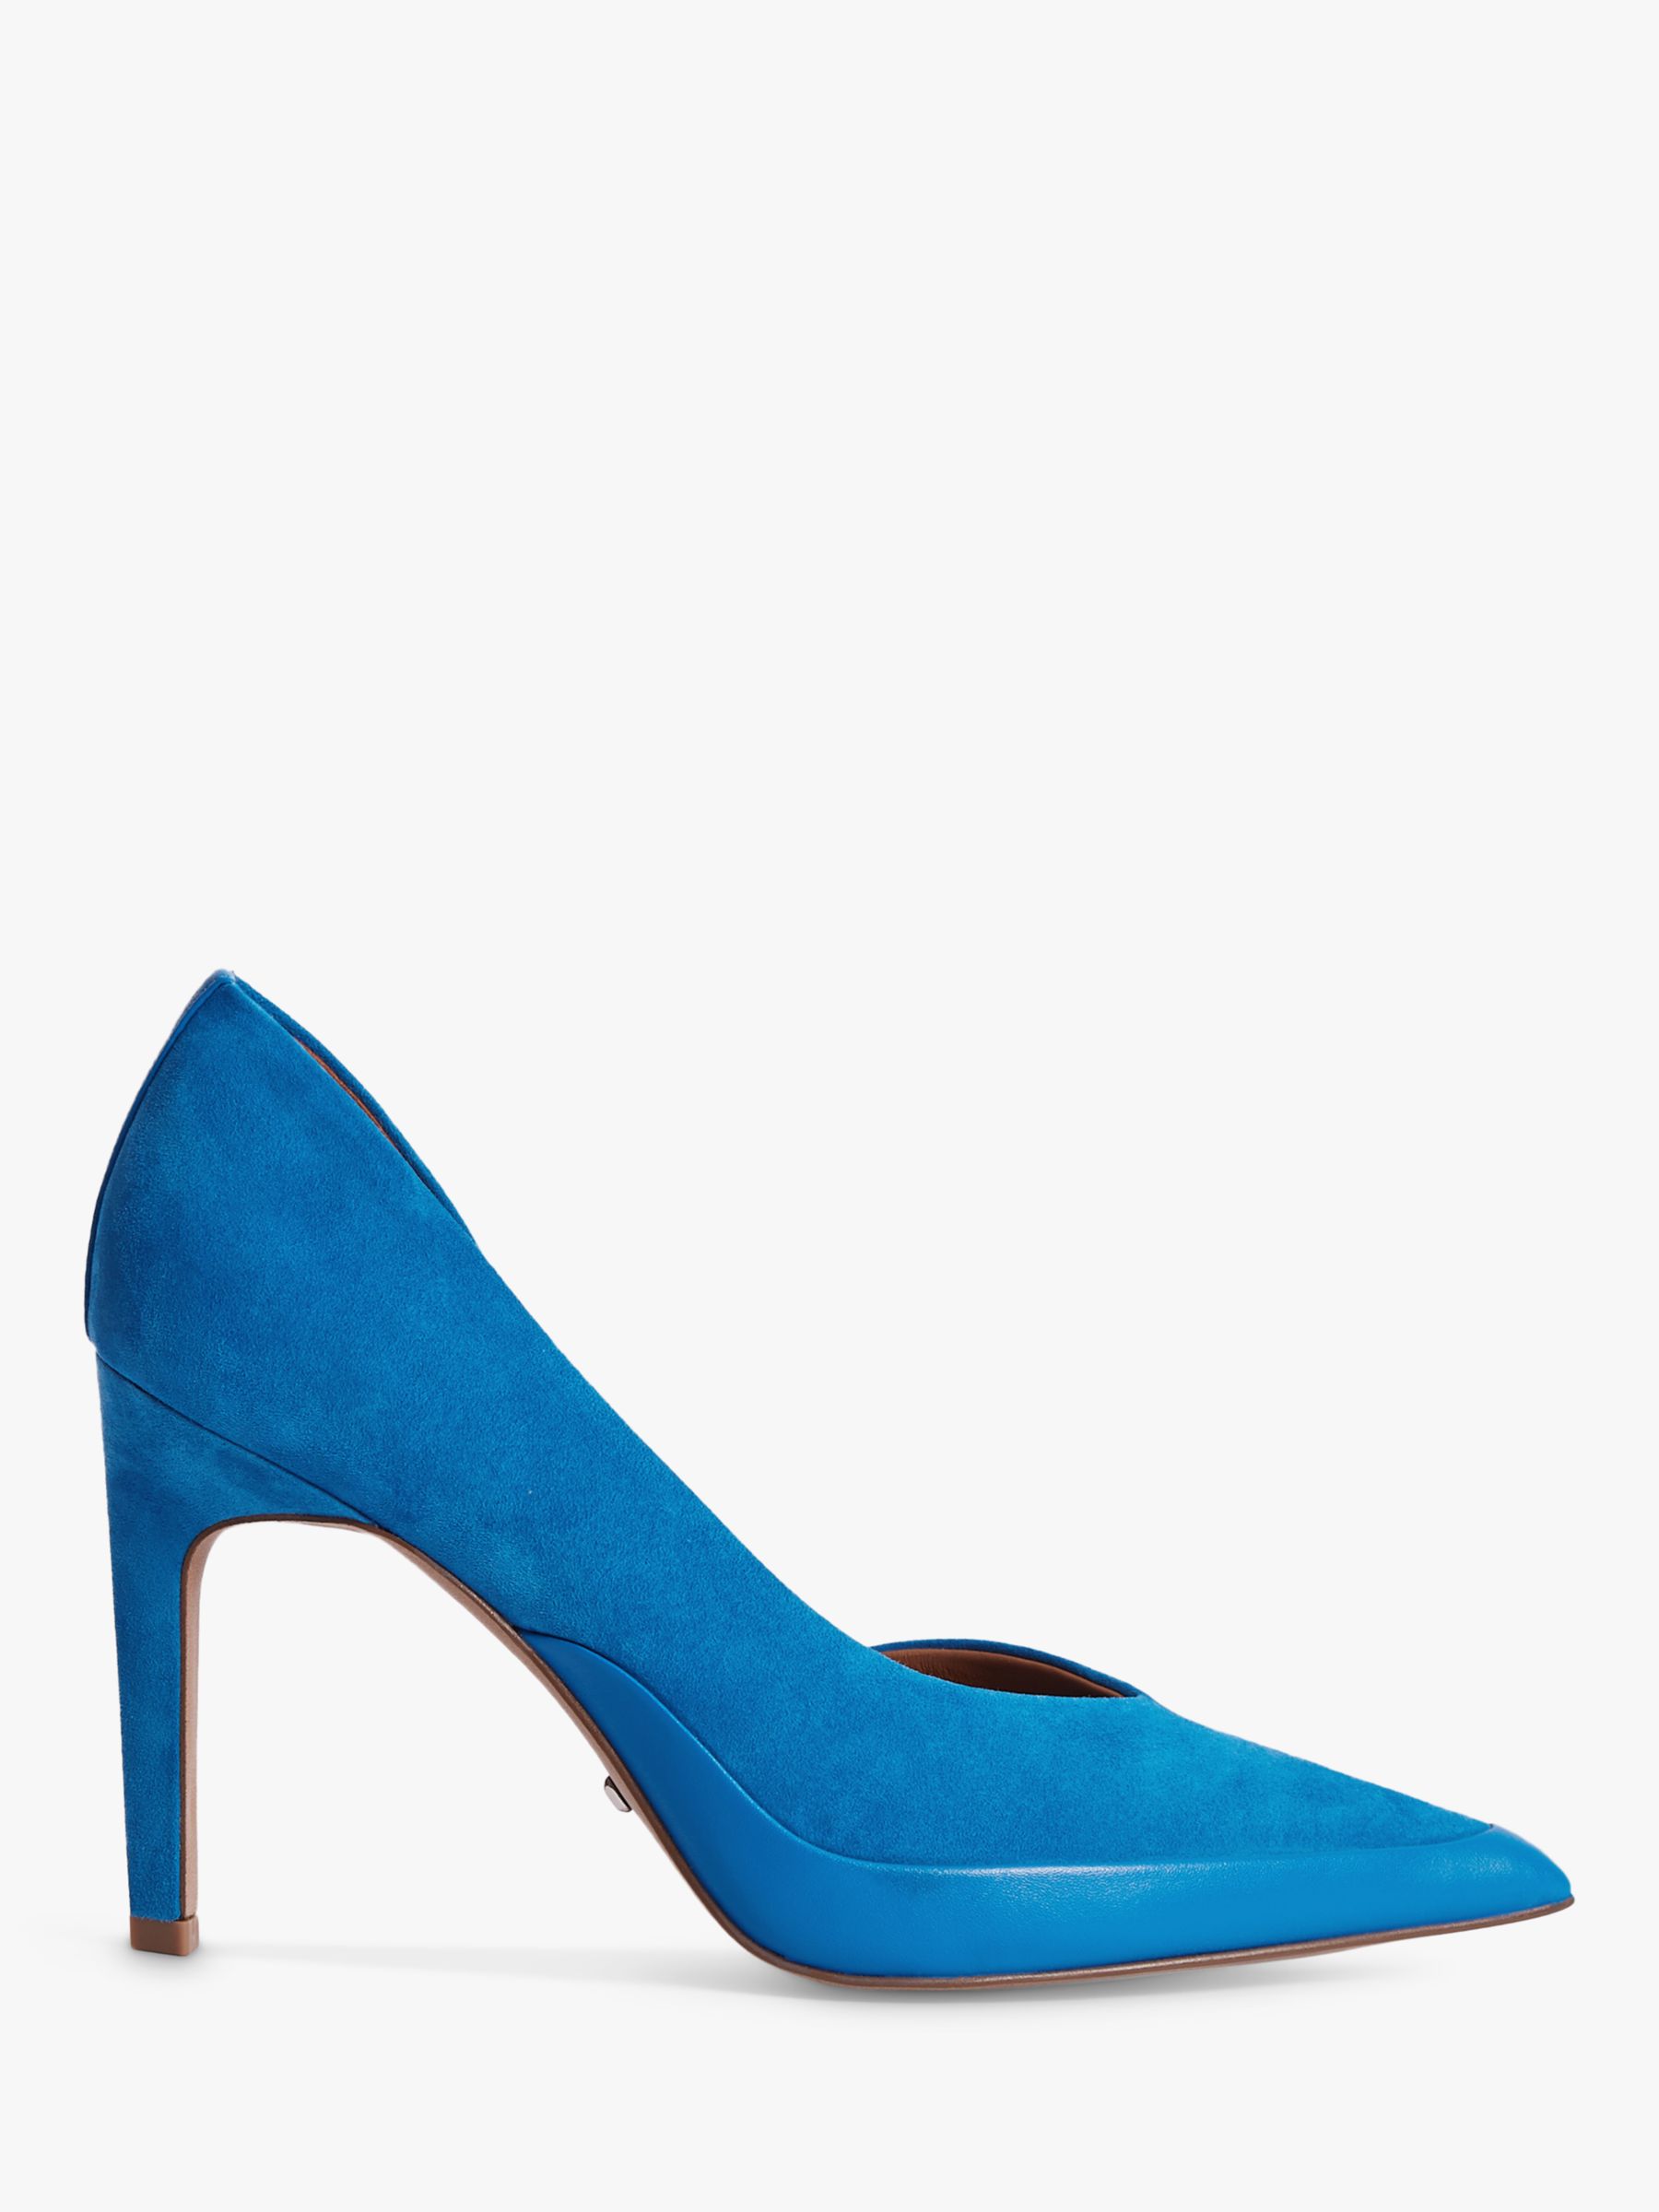 Reiss Alenna Suede Court Shoes, Electric Blue